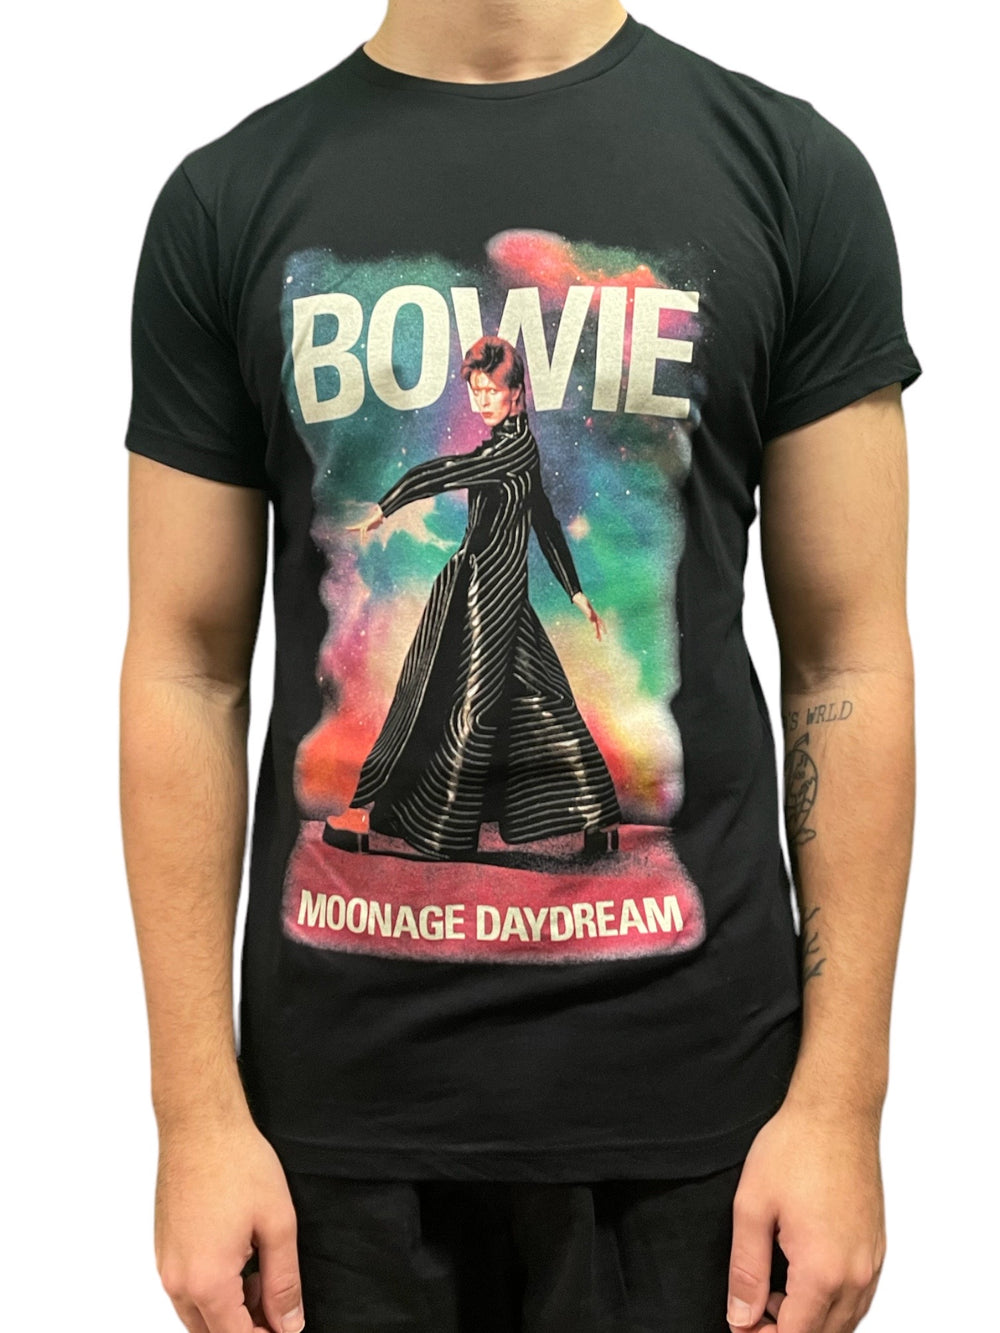 David Bowie - Moonage Daydream 11 Fade Official Unisex T Shirt Brand New Various Sizes